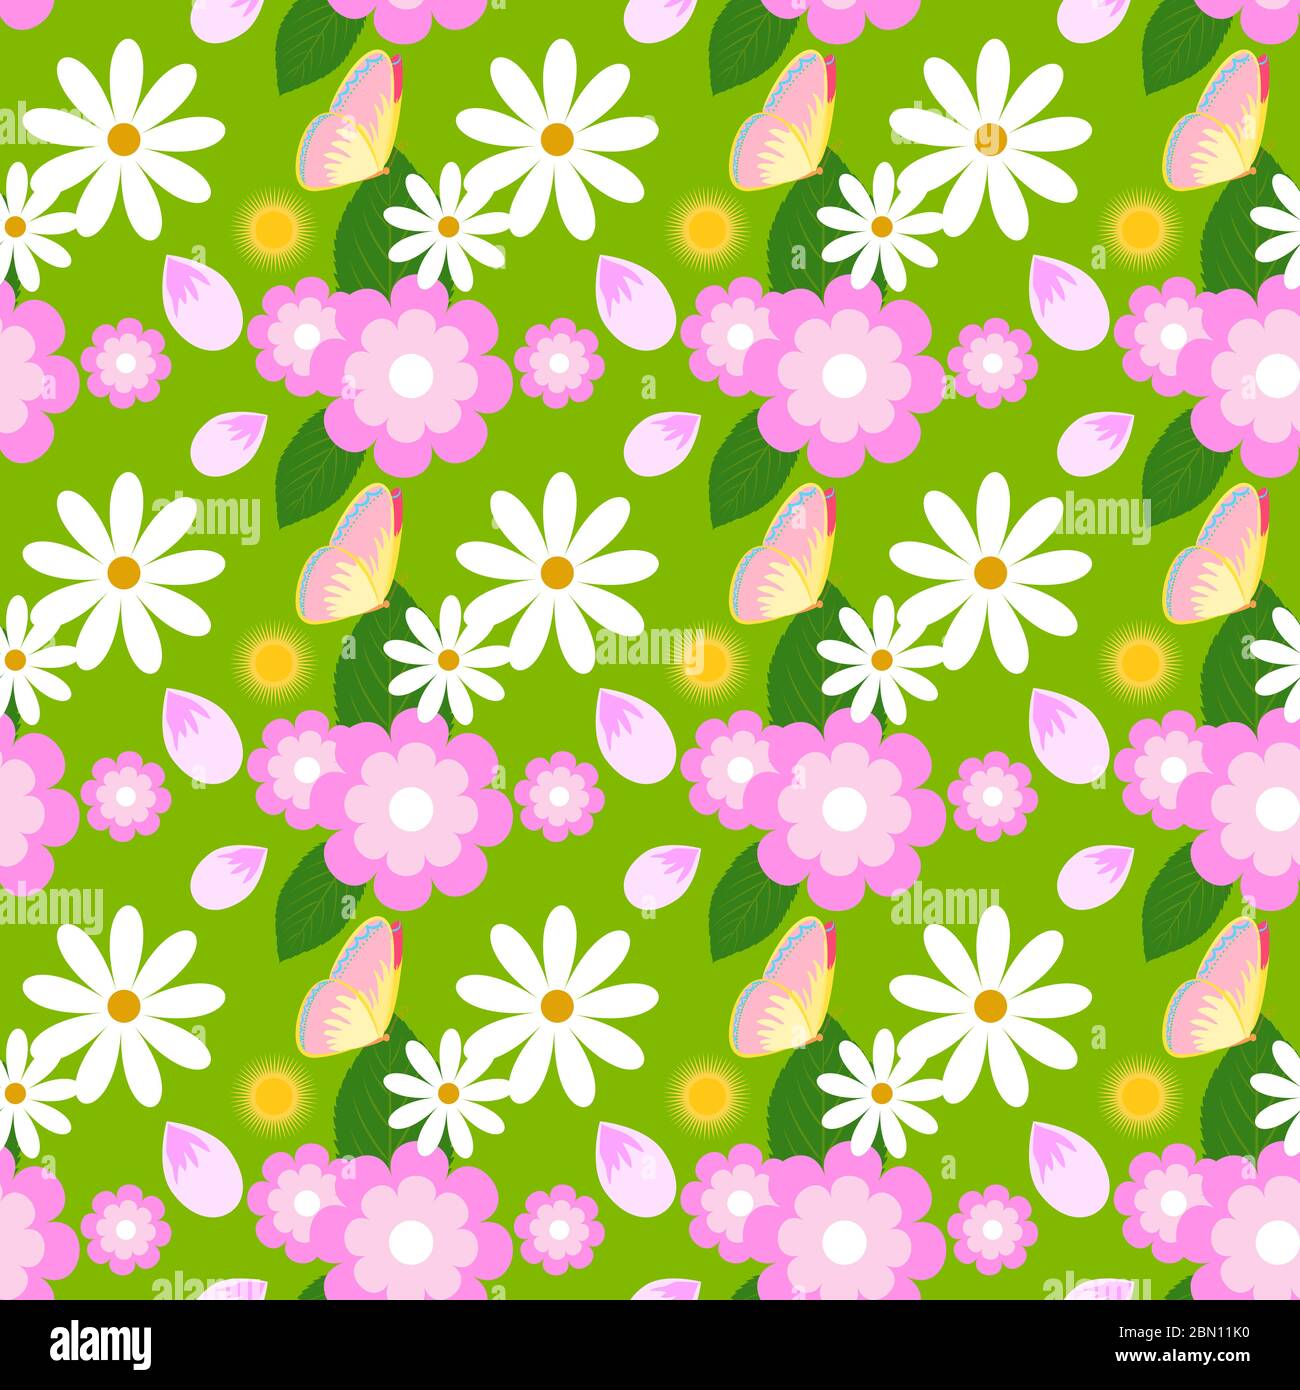 Floral seamless vector pattern with butterflies, chamomiles, daisies, dandelions and leaves. Bright spring seamless vector background with flowers and Stock Vector